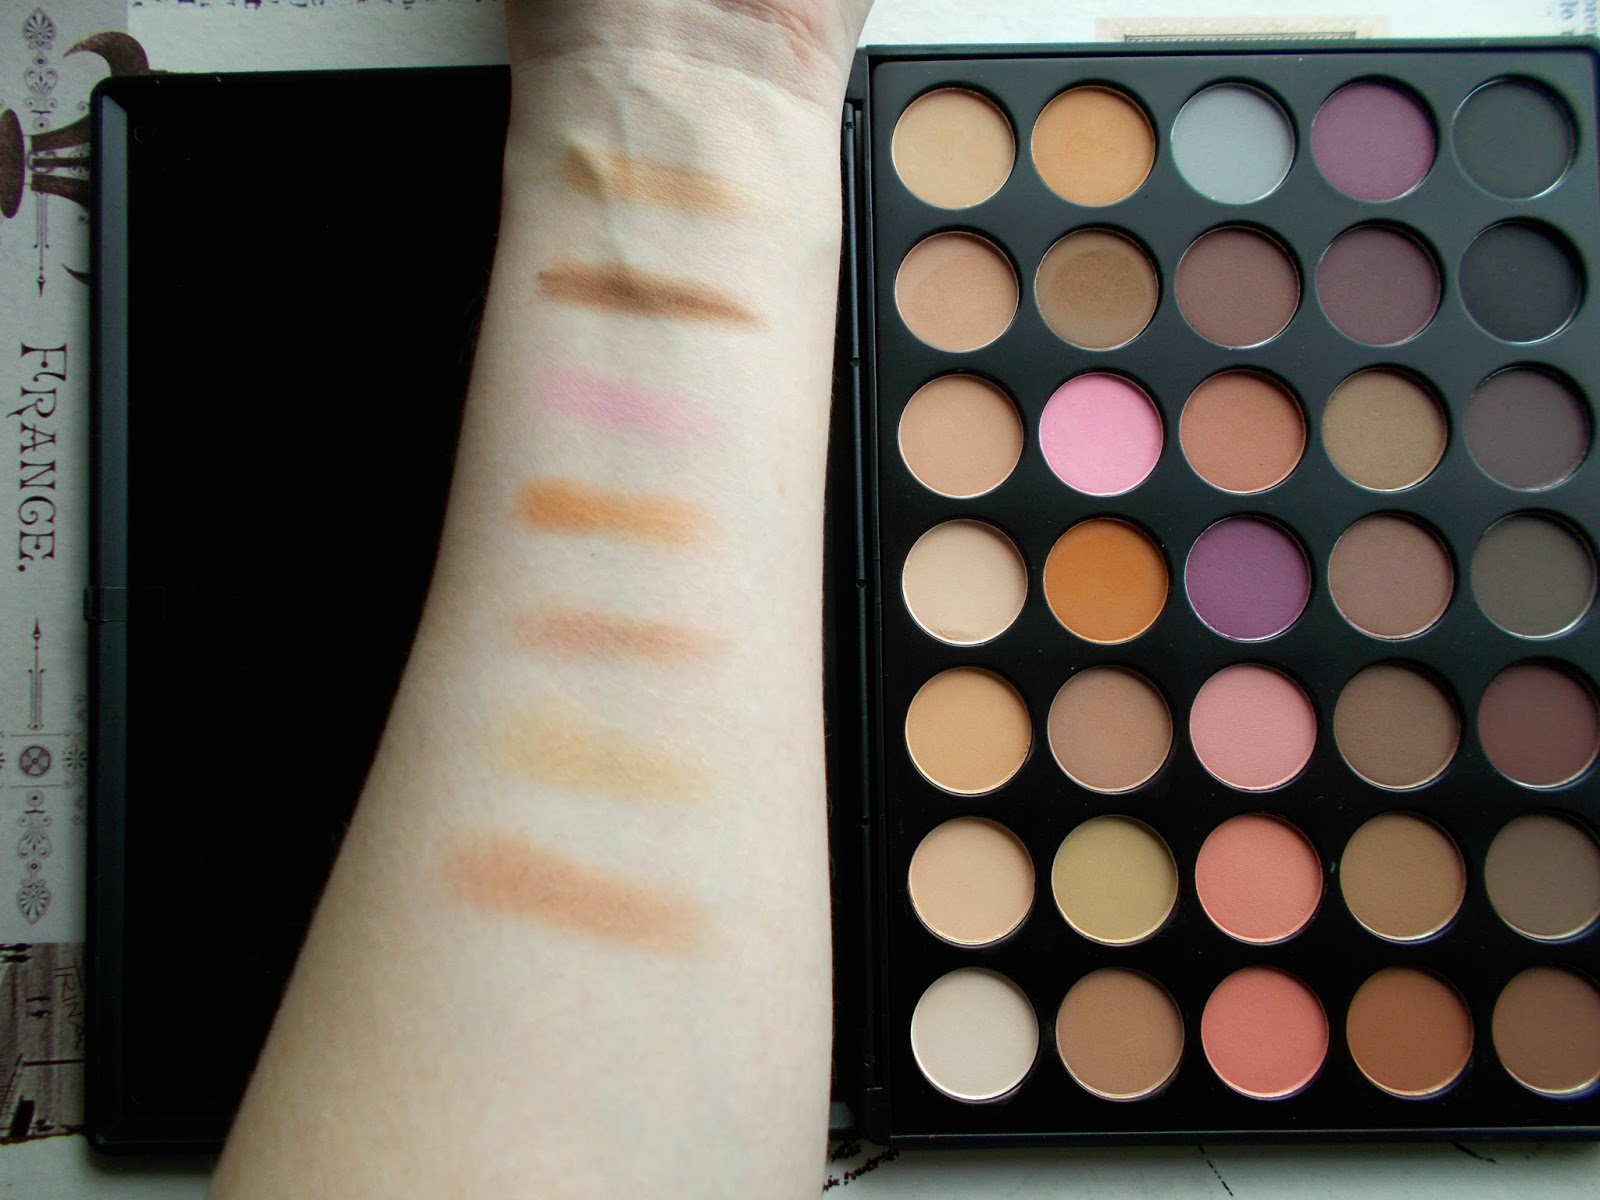 Morphe Brushes BeautyBay review 35N colour matte palette 2nd row swatches